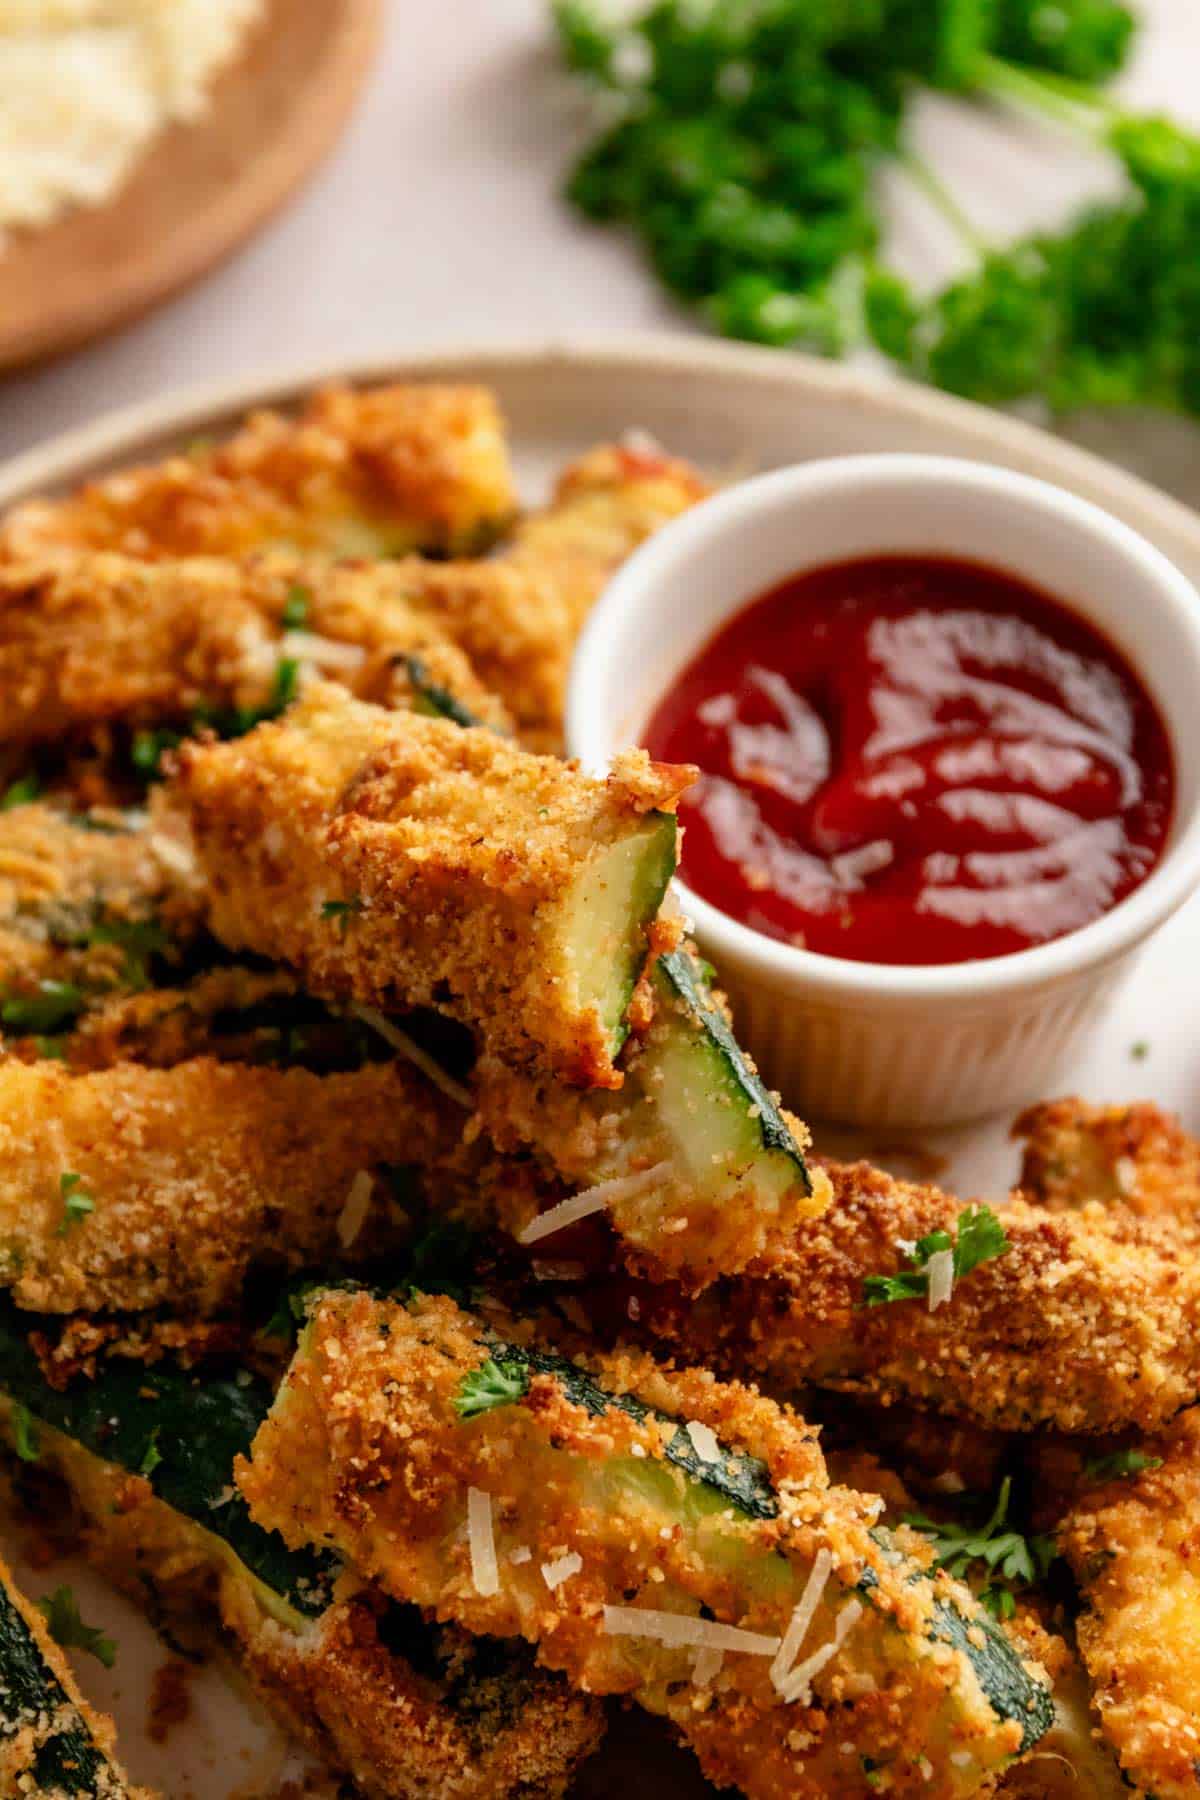 perfectly roasted golden brown zucchini fries served with red sauce.